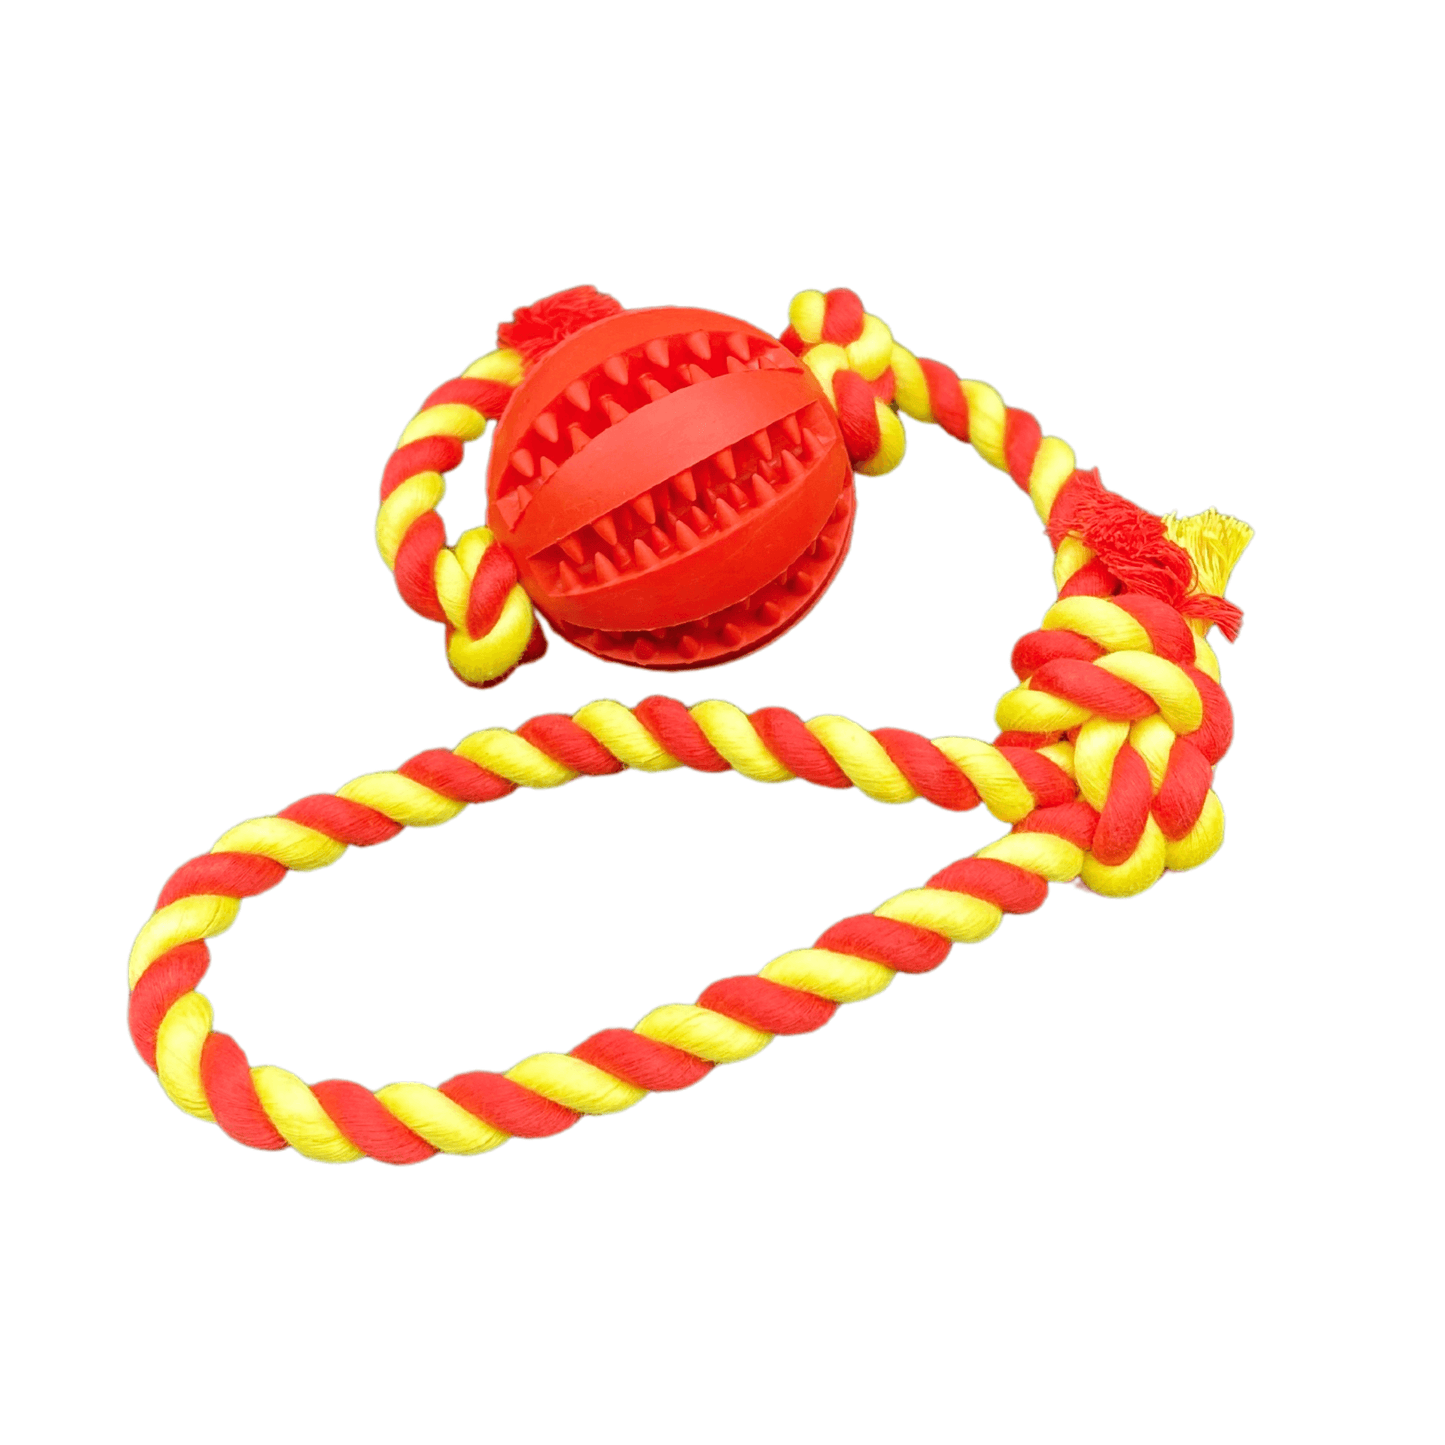 Enrichment dog treat ball with rope